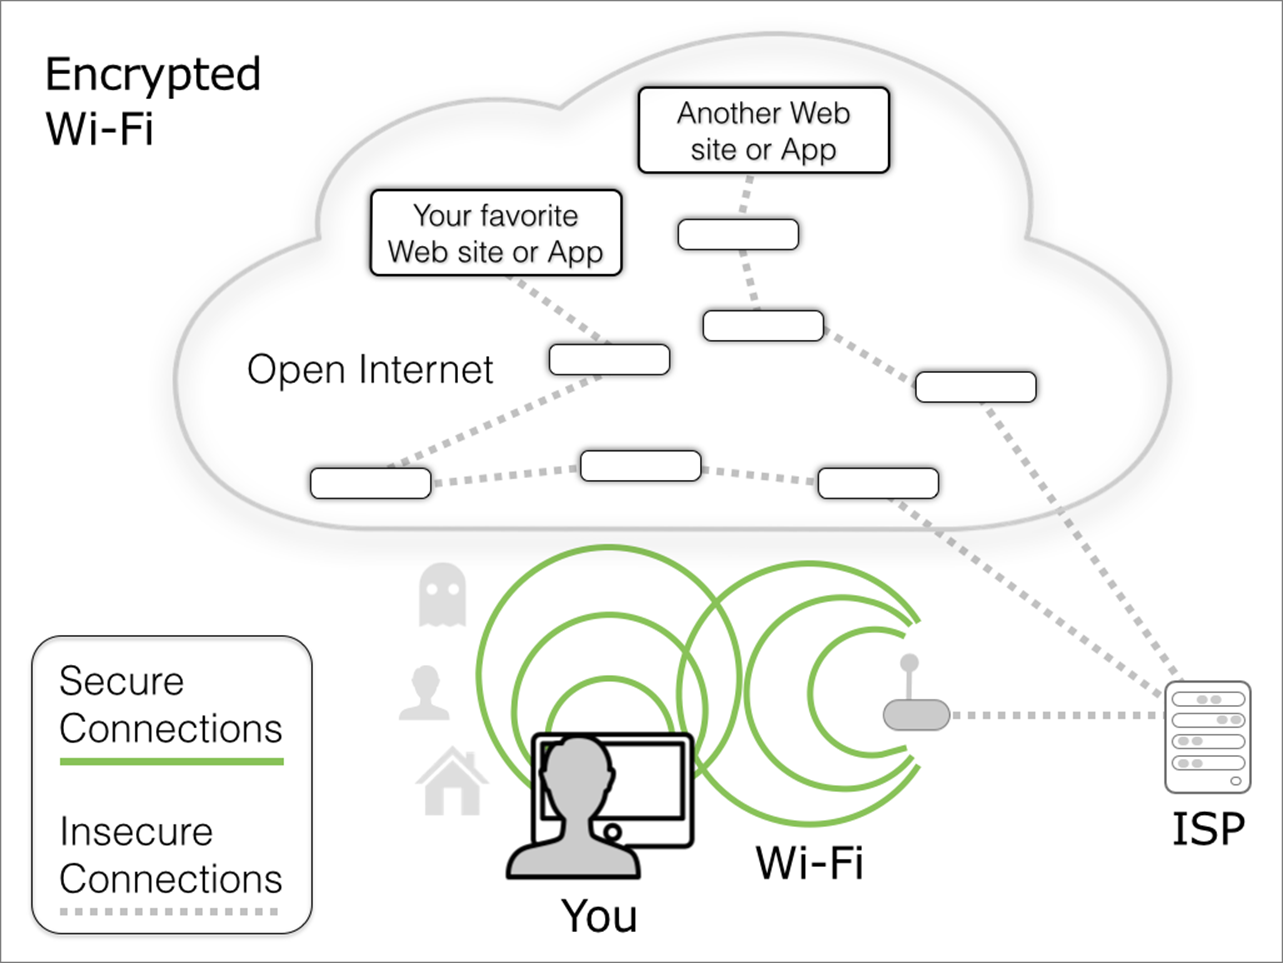 **Figure 3:** With encrypted Wi-Fi, you protect the local portion of your Internet connection from sniffing.